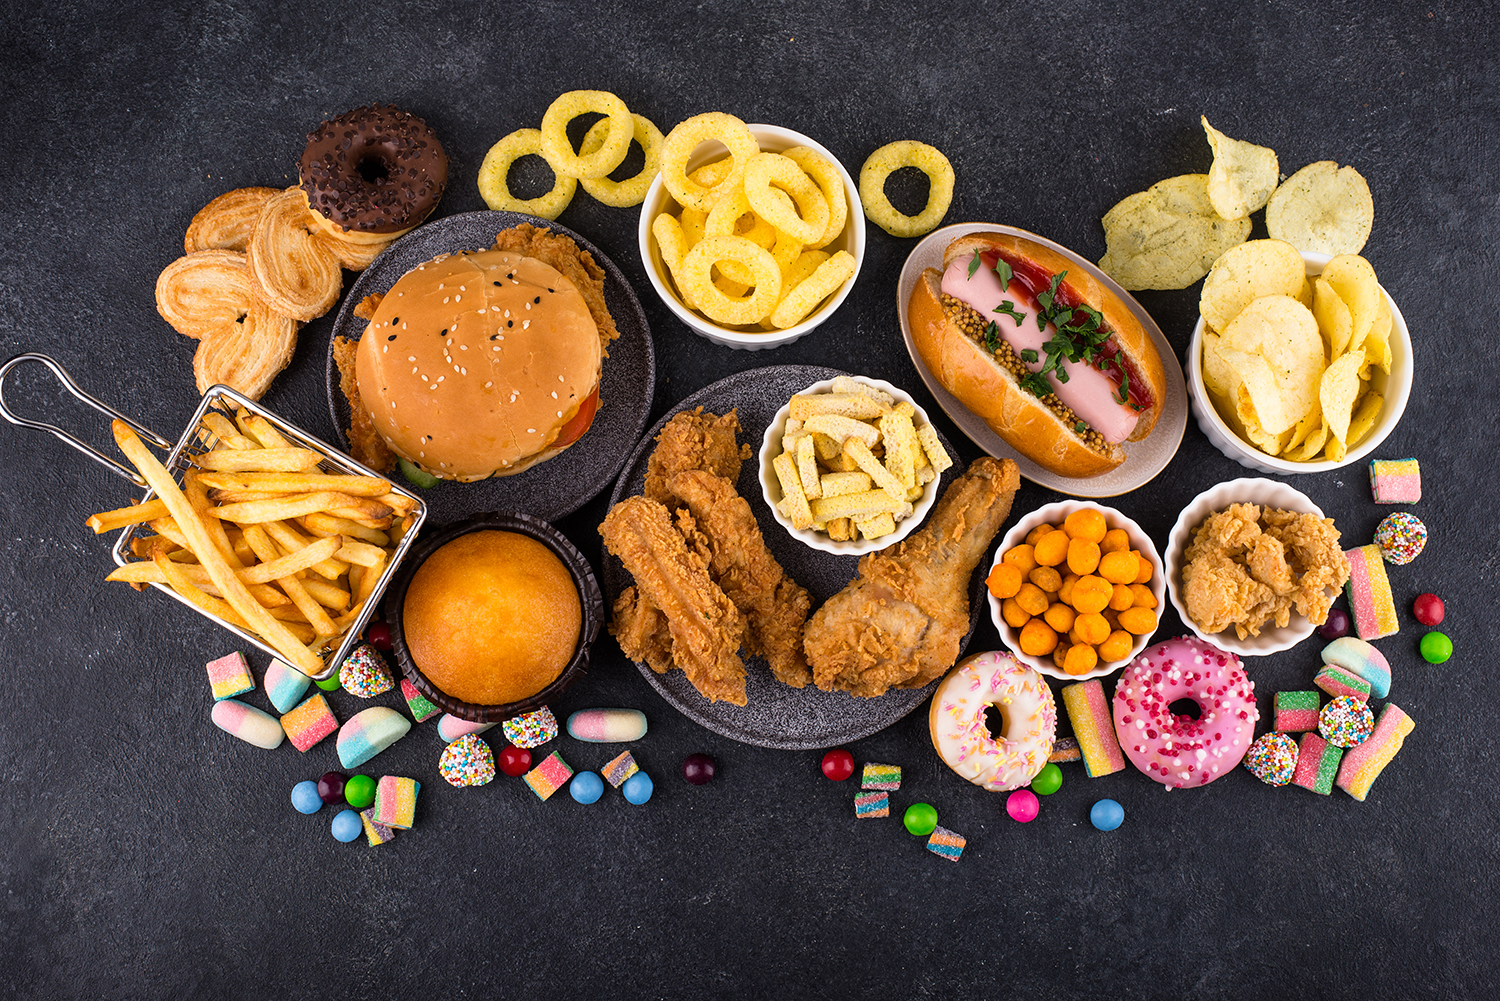 Curbing appetites for ultra-processed foods - Obesity - Issues Online